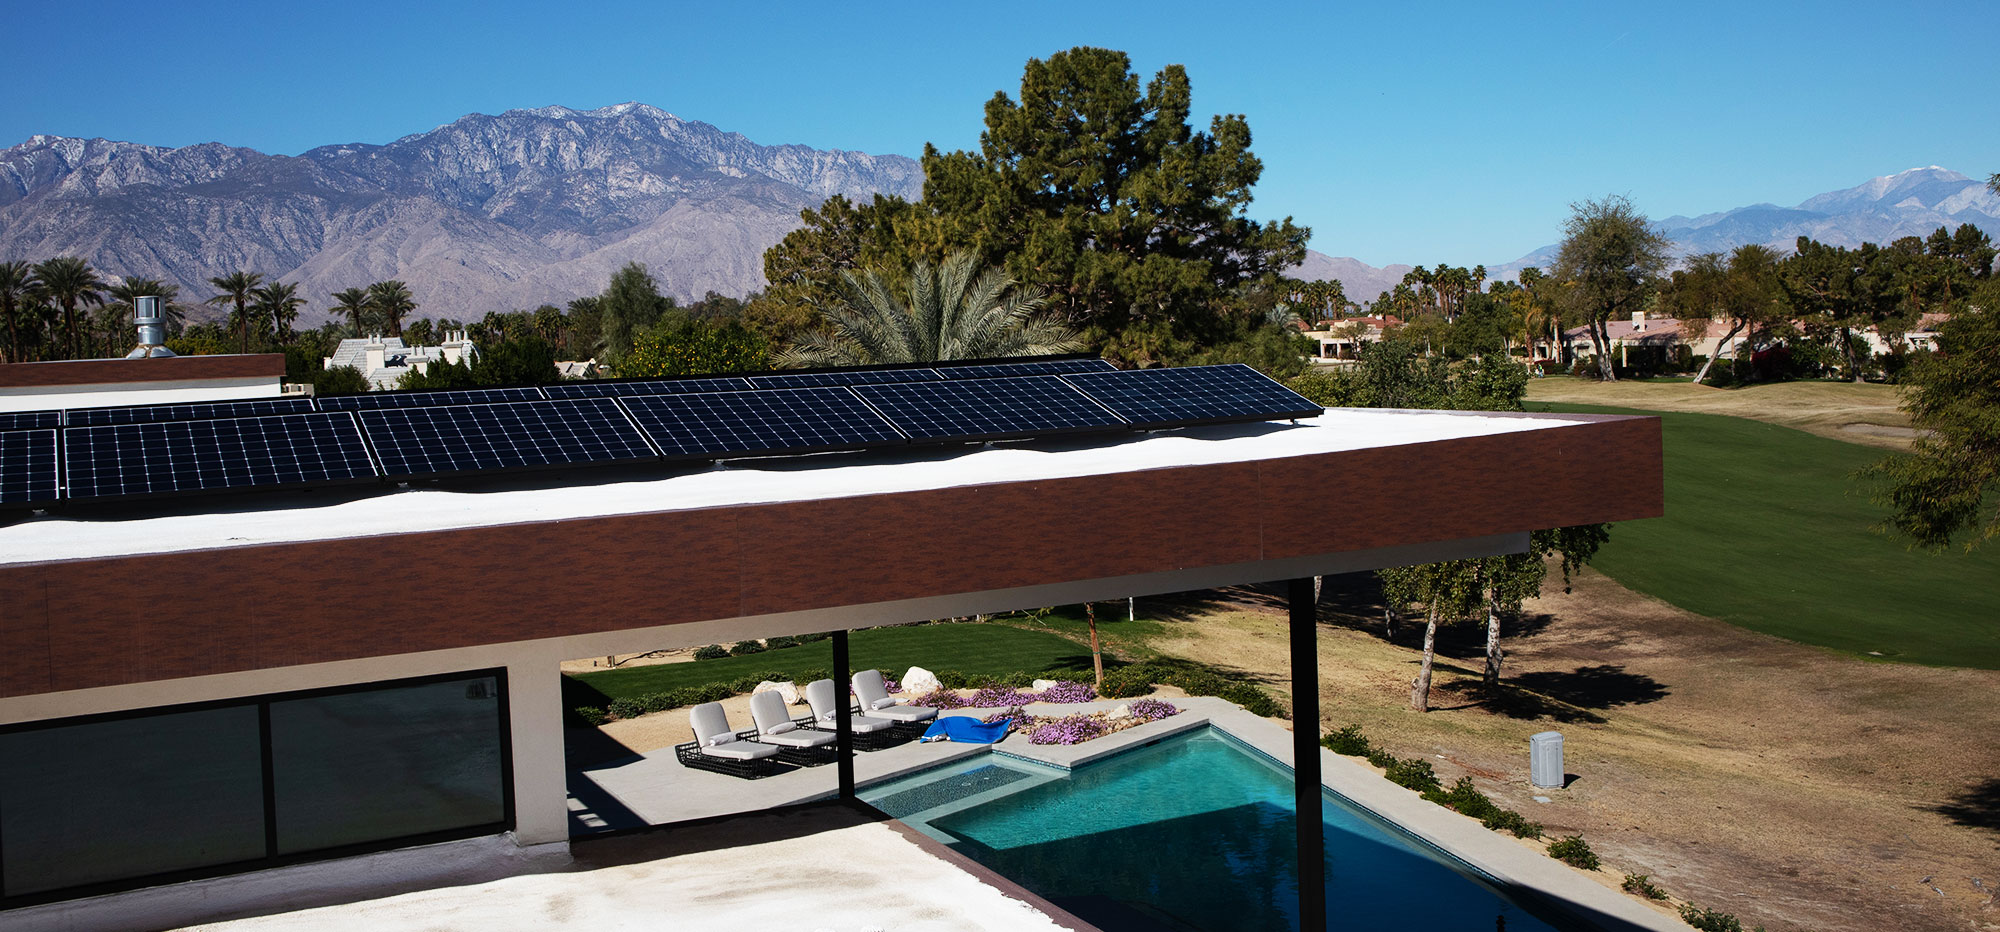 Photo of Solar Panels For Heating Up A Swimming Pool on top of the roof. Swimming pool shown below and the property background shows several trees and a mountain in the distance